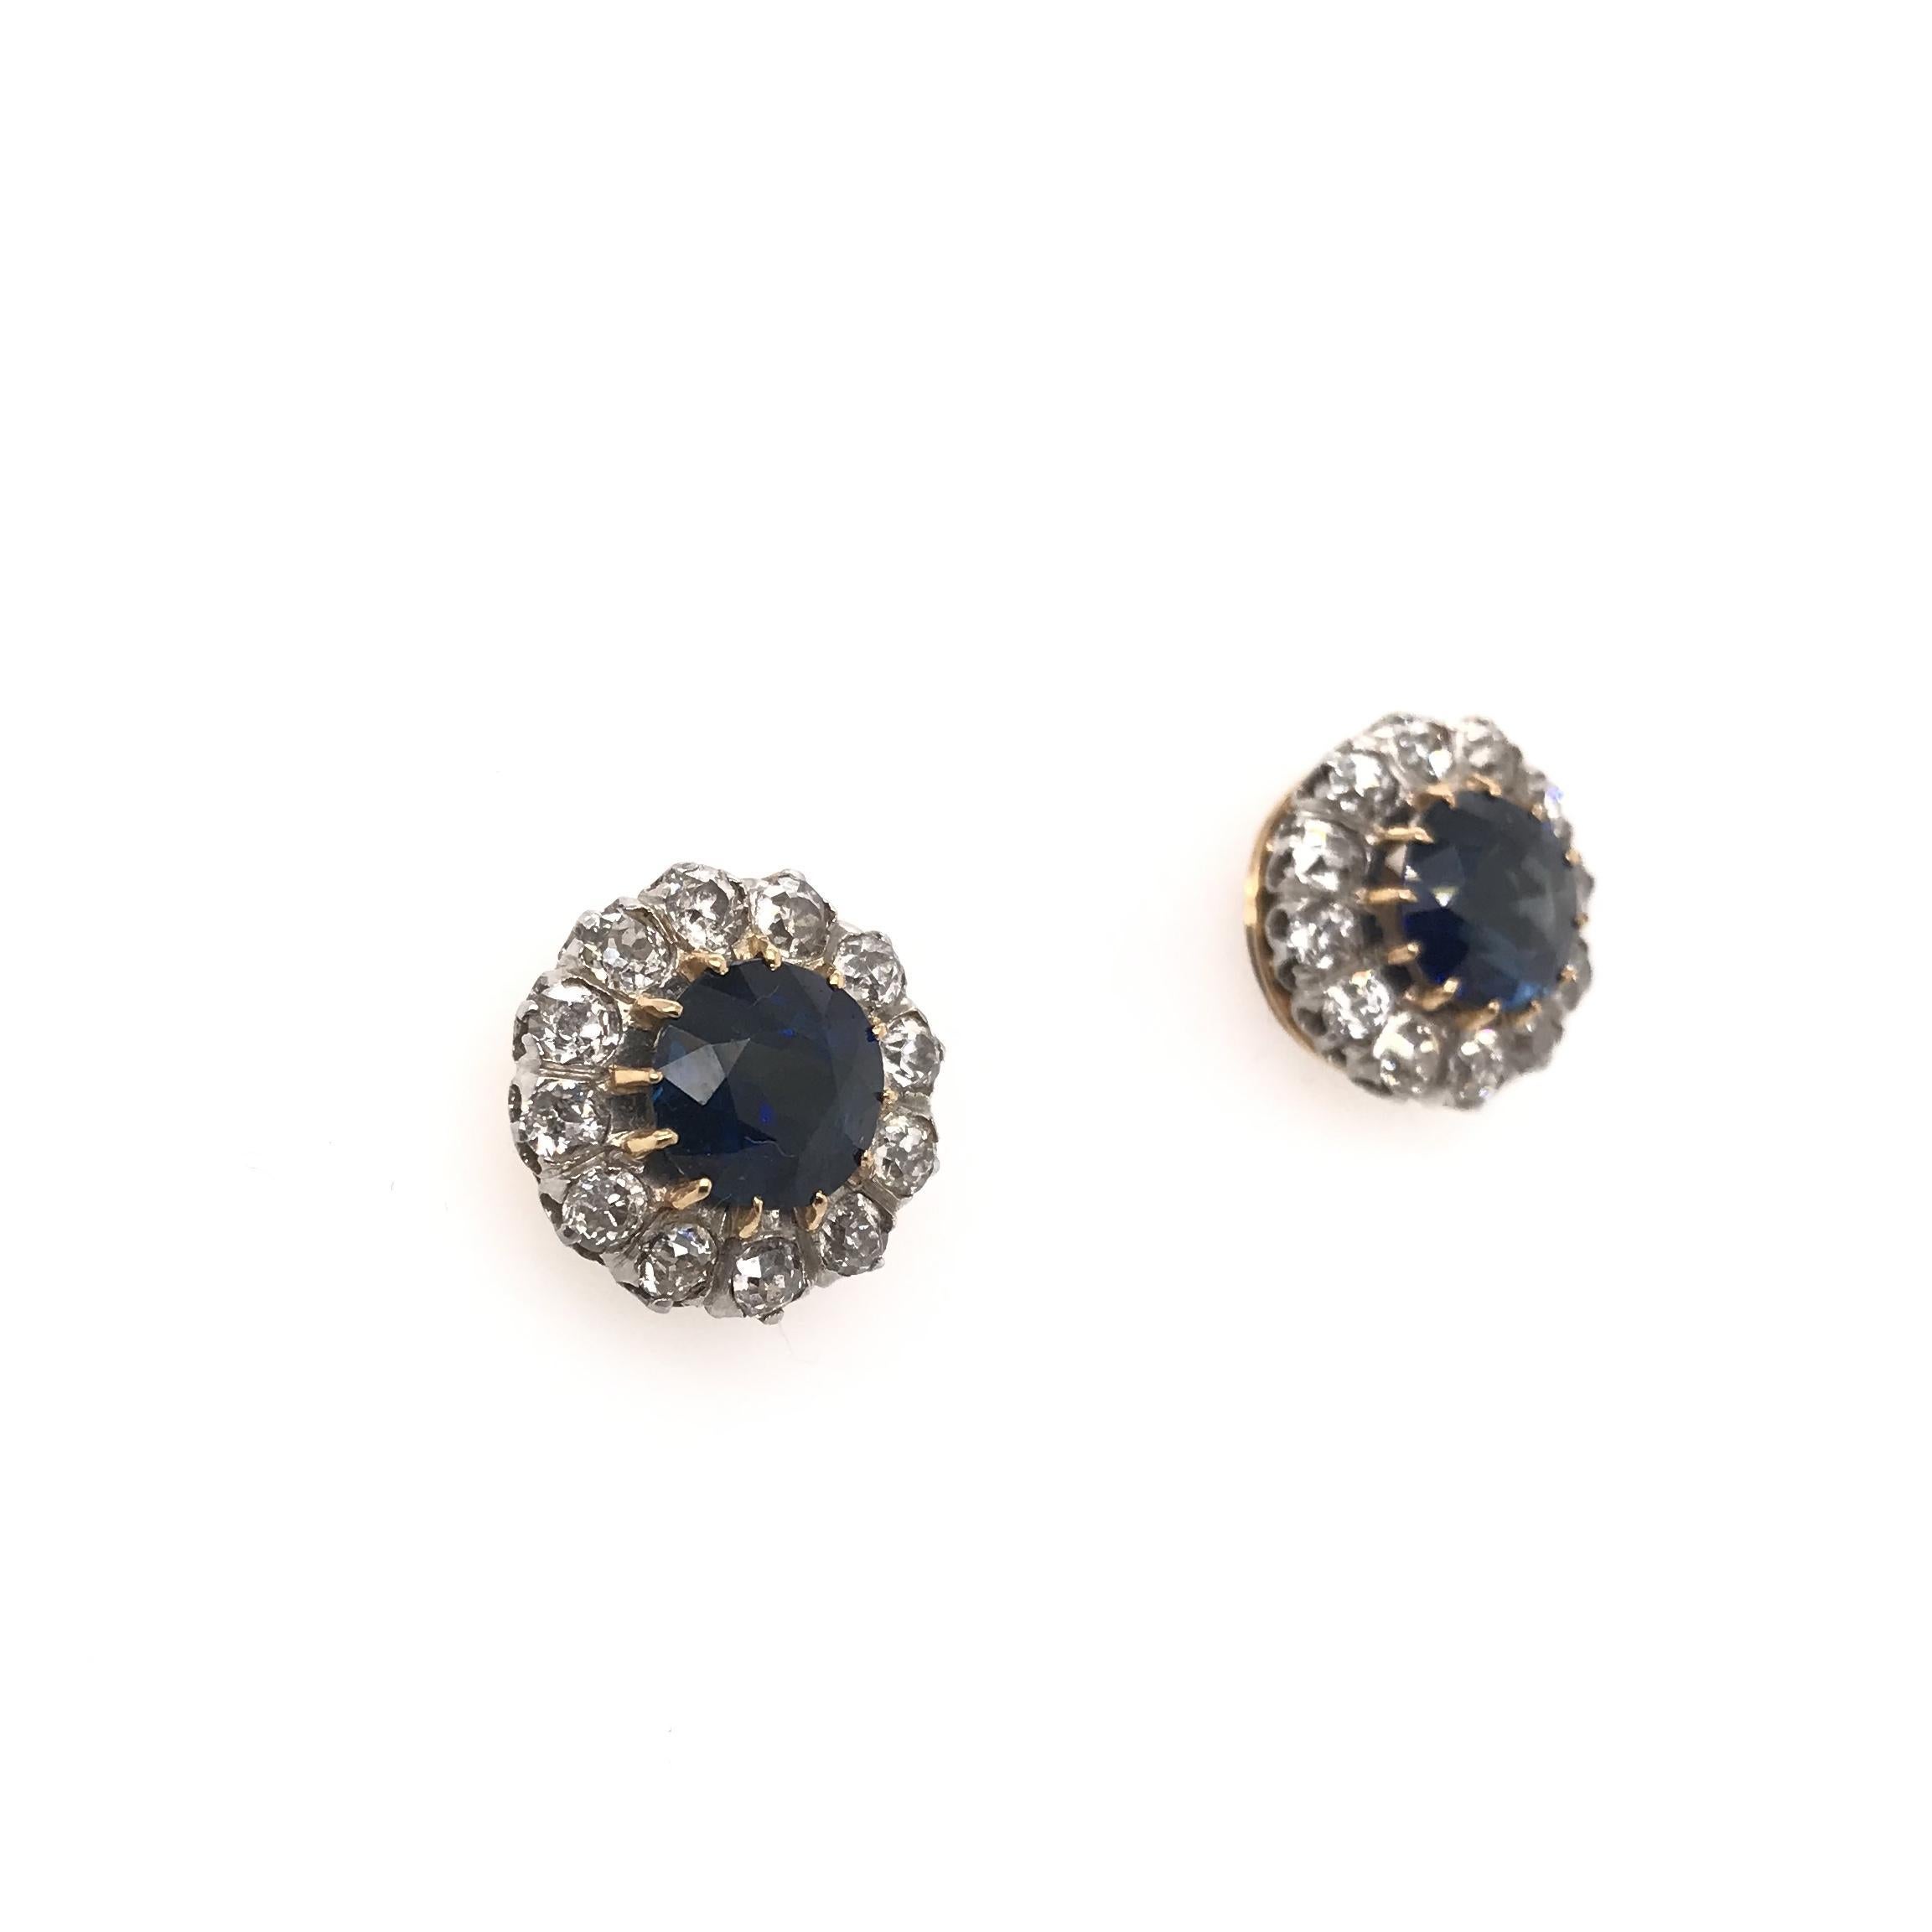 Antique Edwardian Sapphire and Diamond Earrings 8